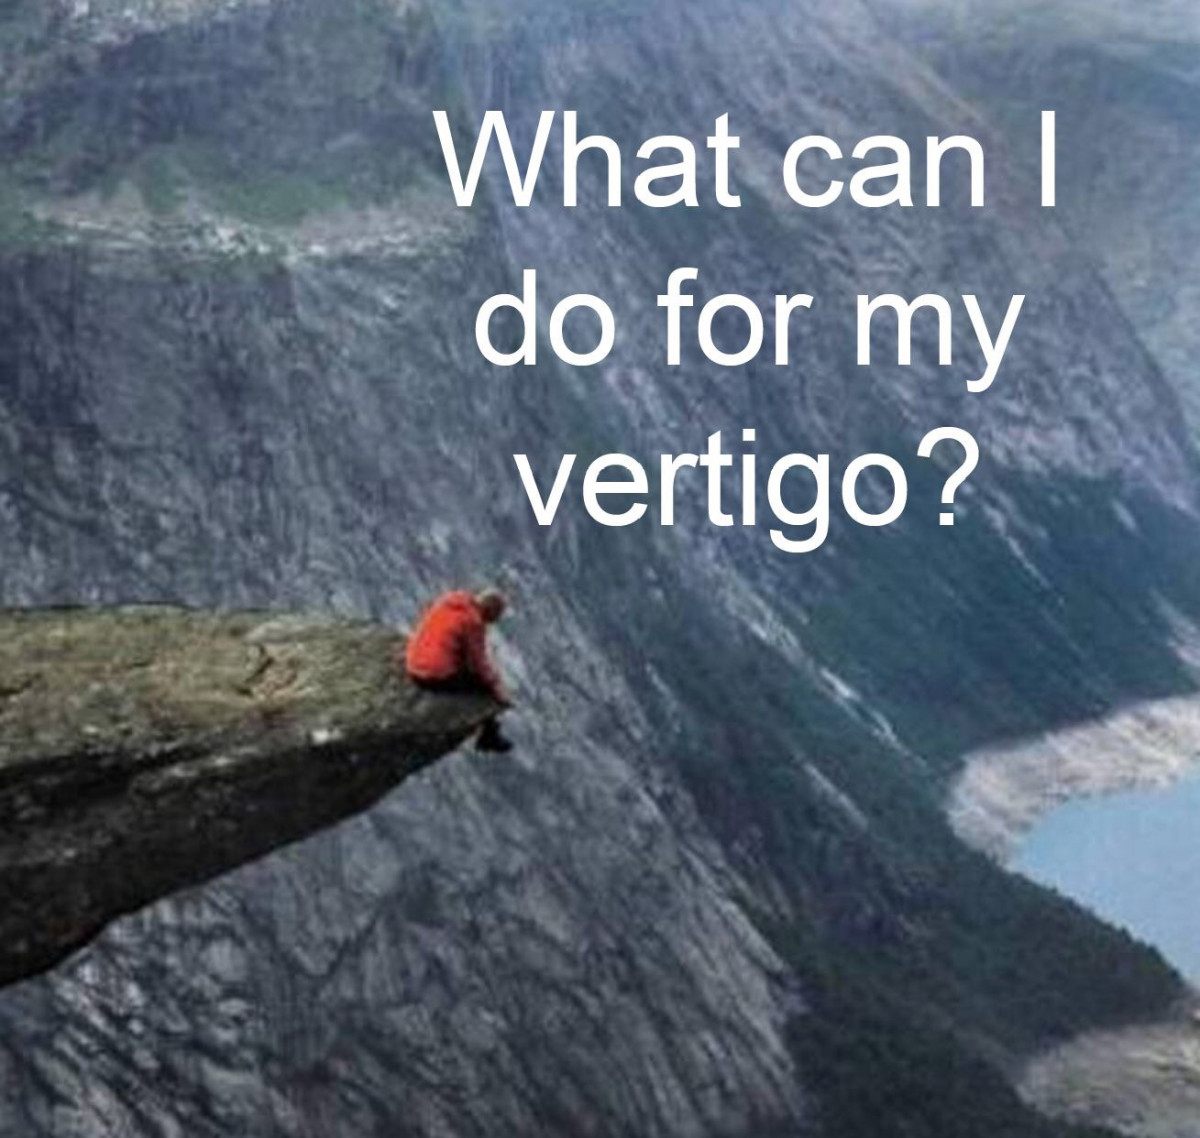 What is vertigo and what can I do for it?